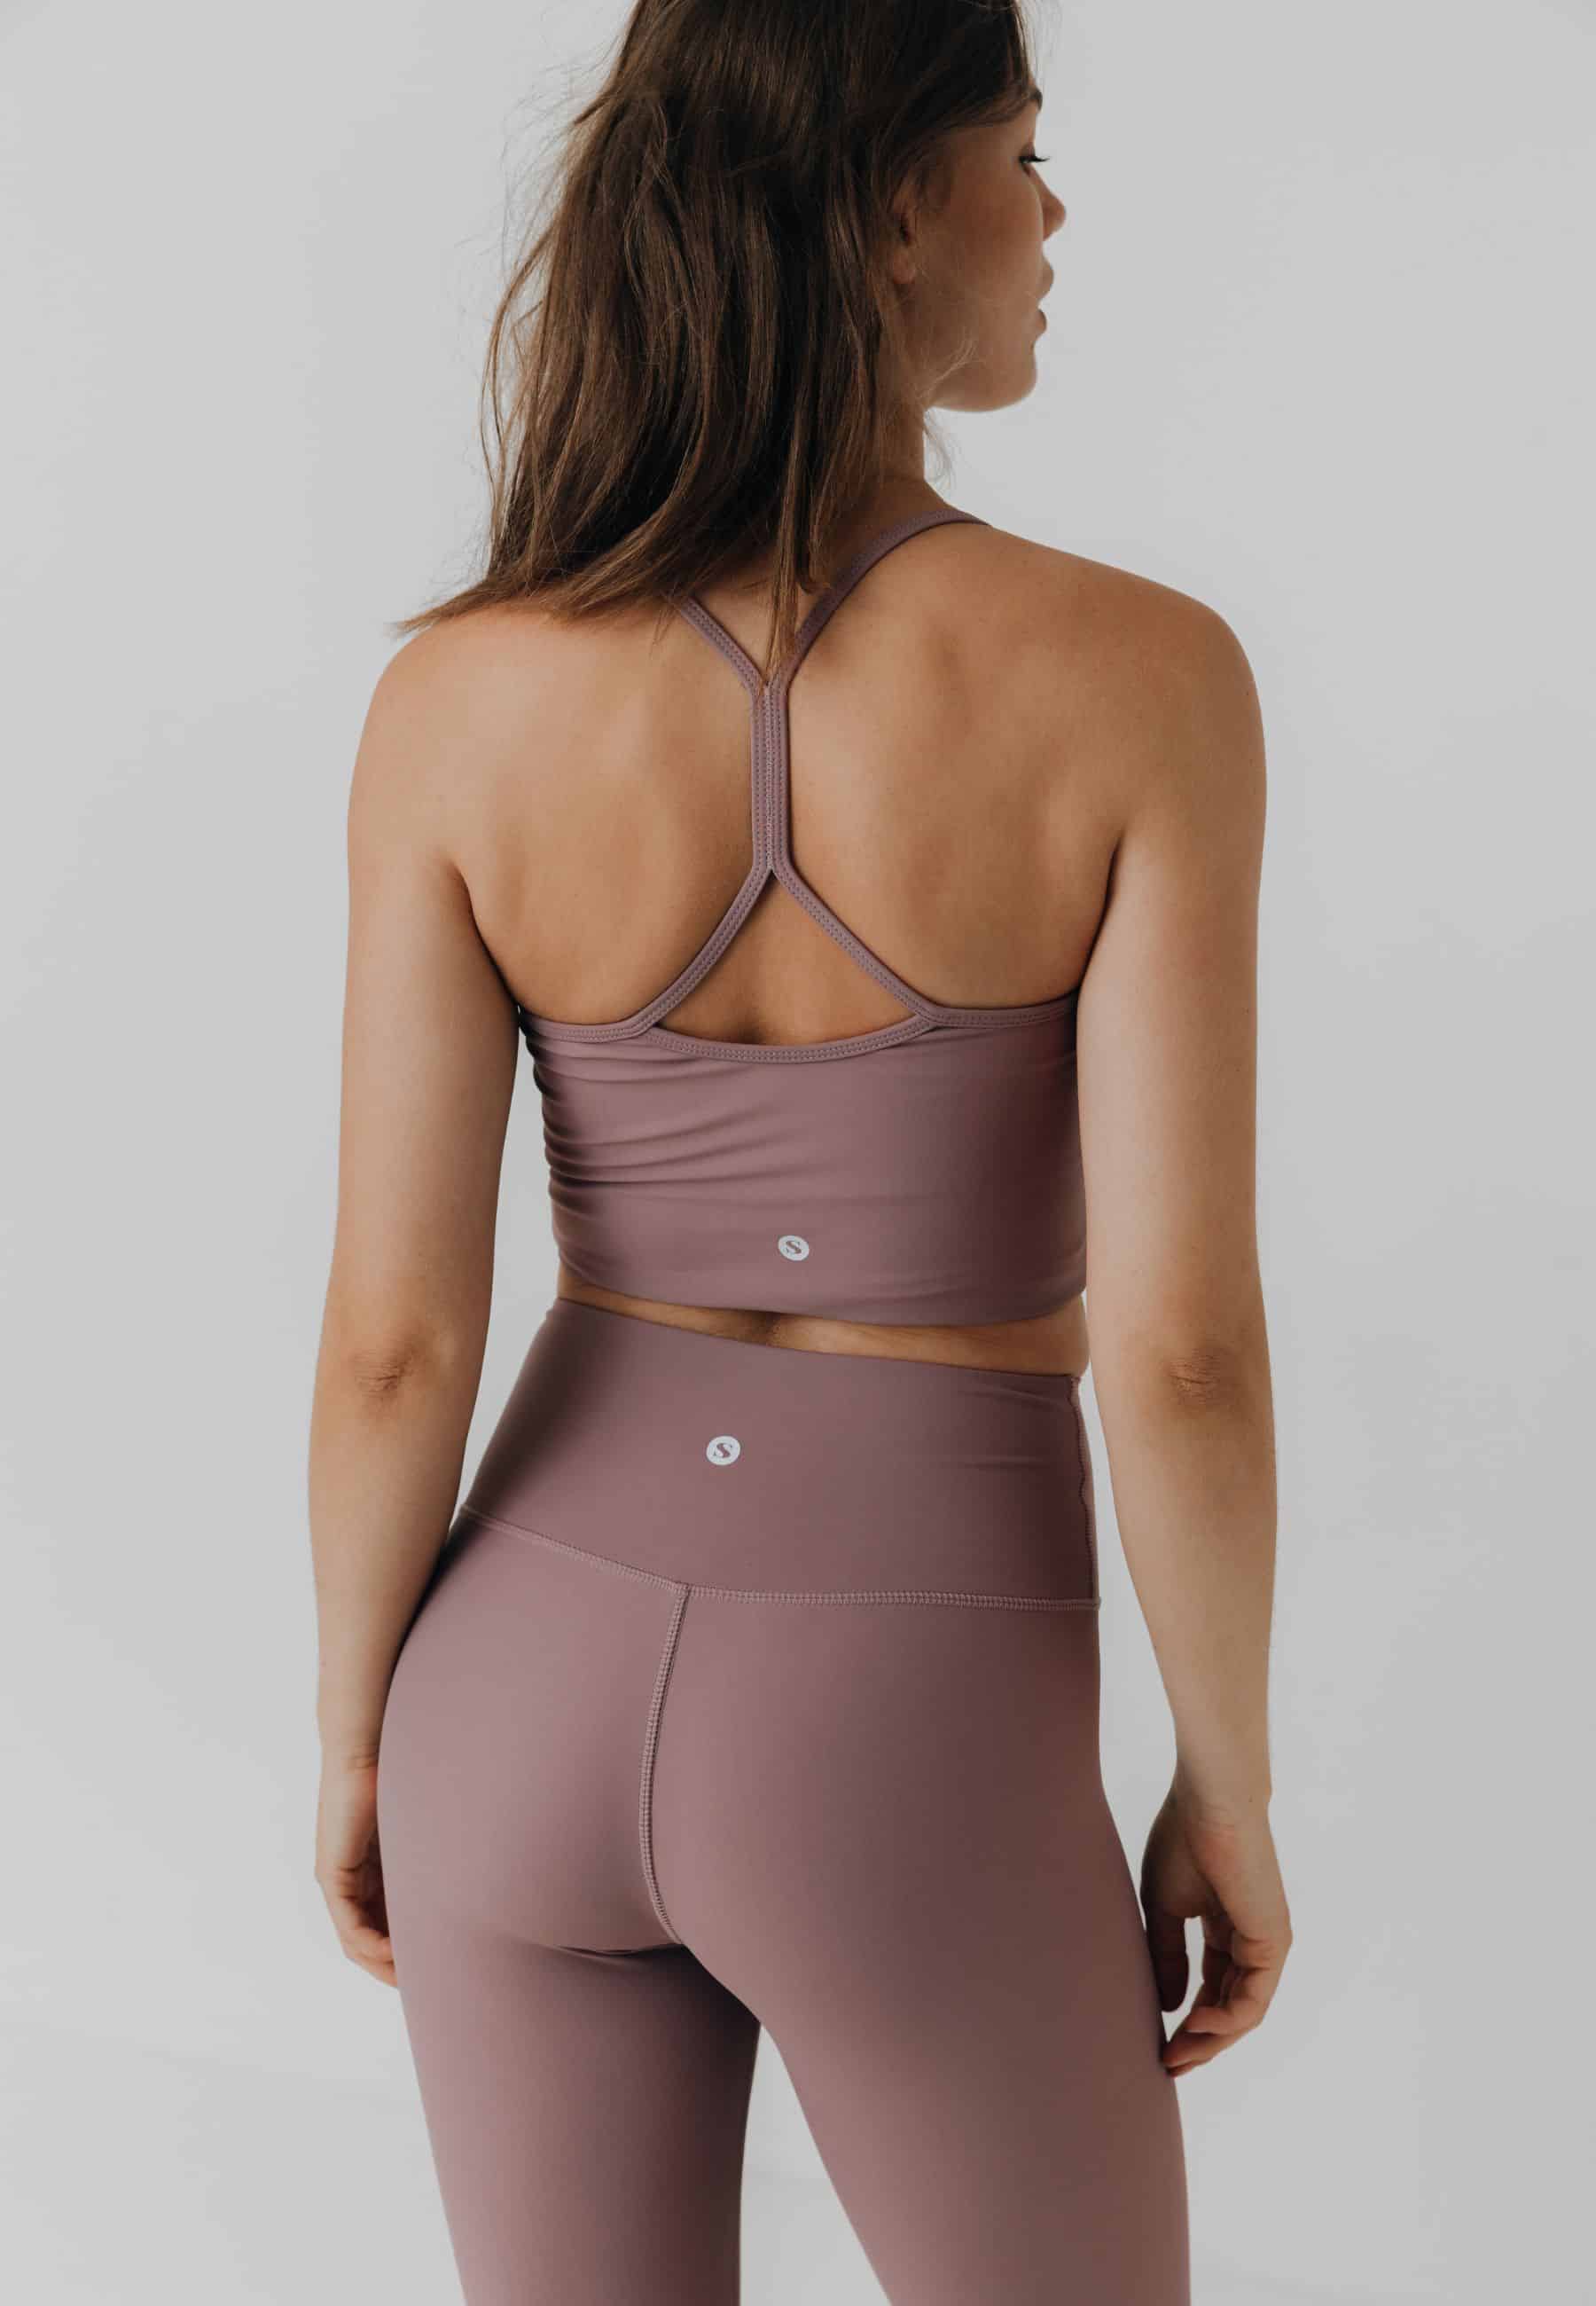 Sisterly Tribe - Yoga Singlet Top Dusky Orchid. Light support, Thin shoulder strap, minimalistic design, Buttery Soft and light, matte fabric.